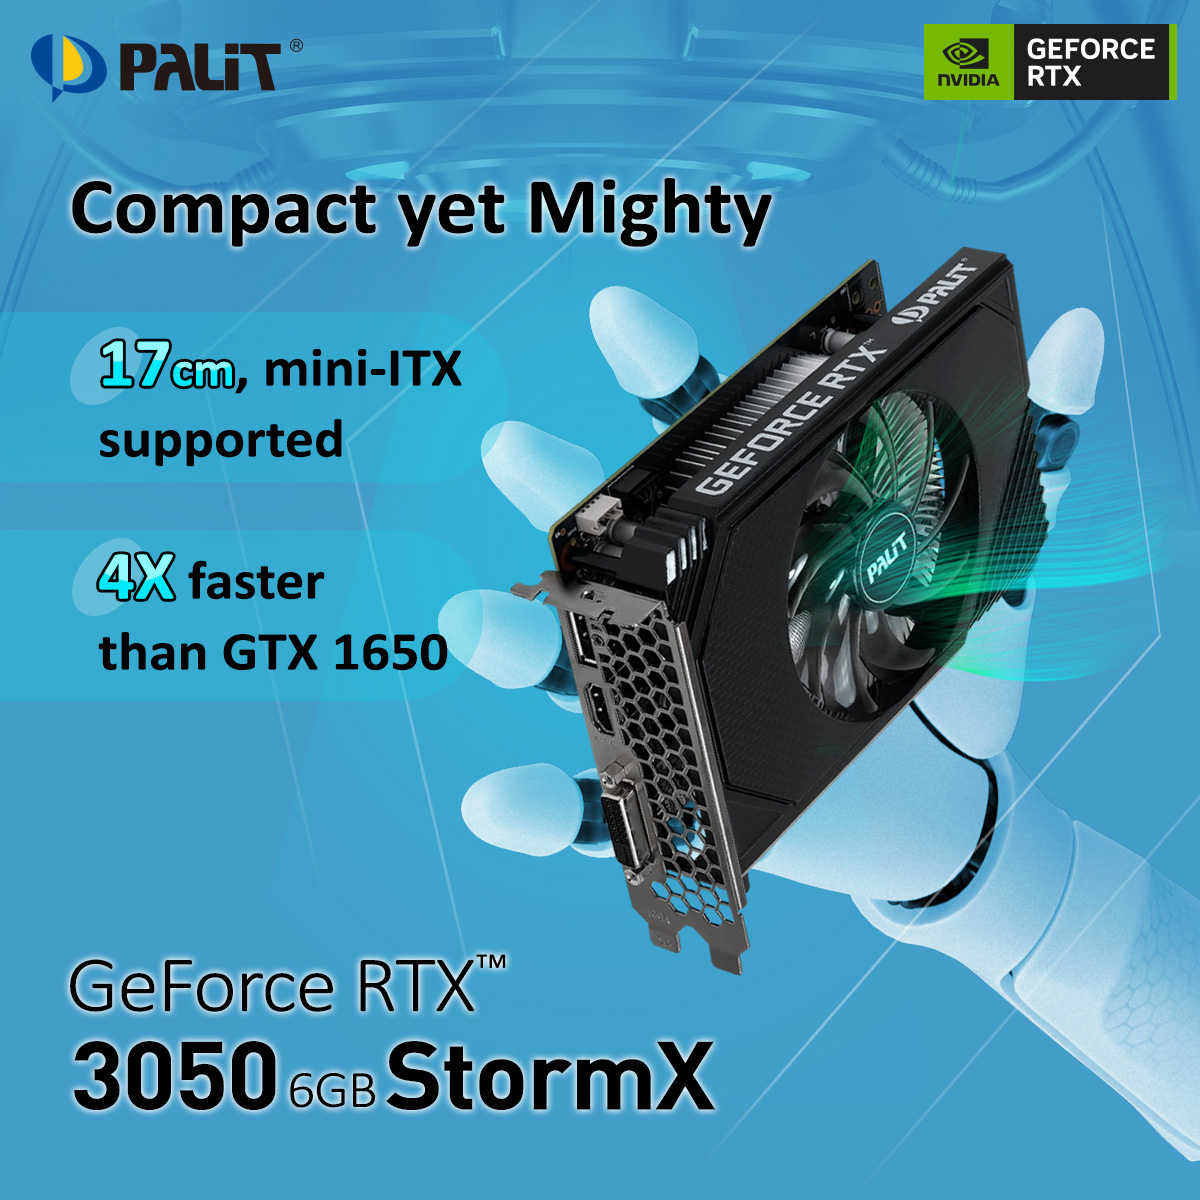 Small Size, Big Performance. Measuring just 17cm, the #Palit GeForce RTX 3050 6GB StormX is mini-ITX supported and 4X faster than the GTX 1650. Experience the mighty power of a full-sized graphics card while saving space! #minigpu #miniitx #itxpc